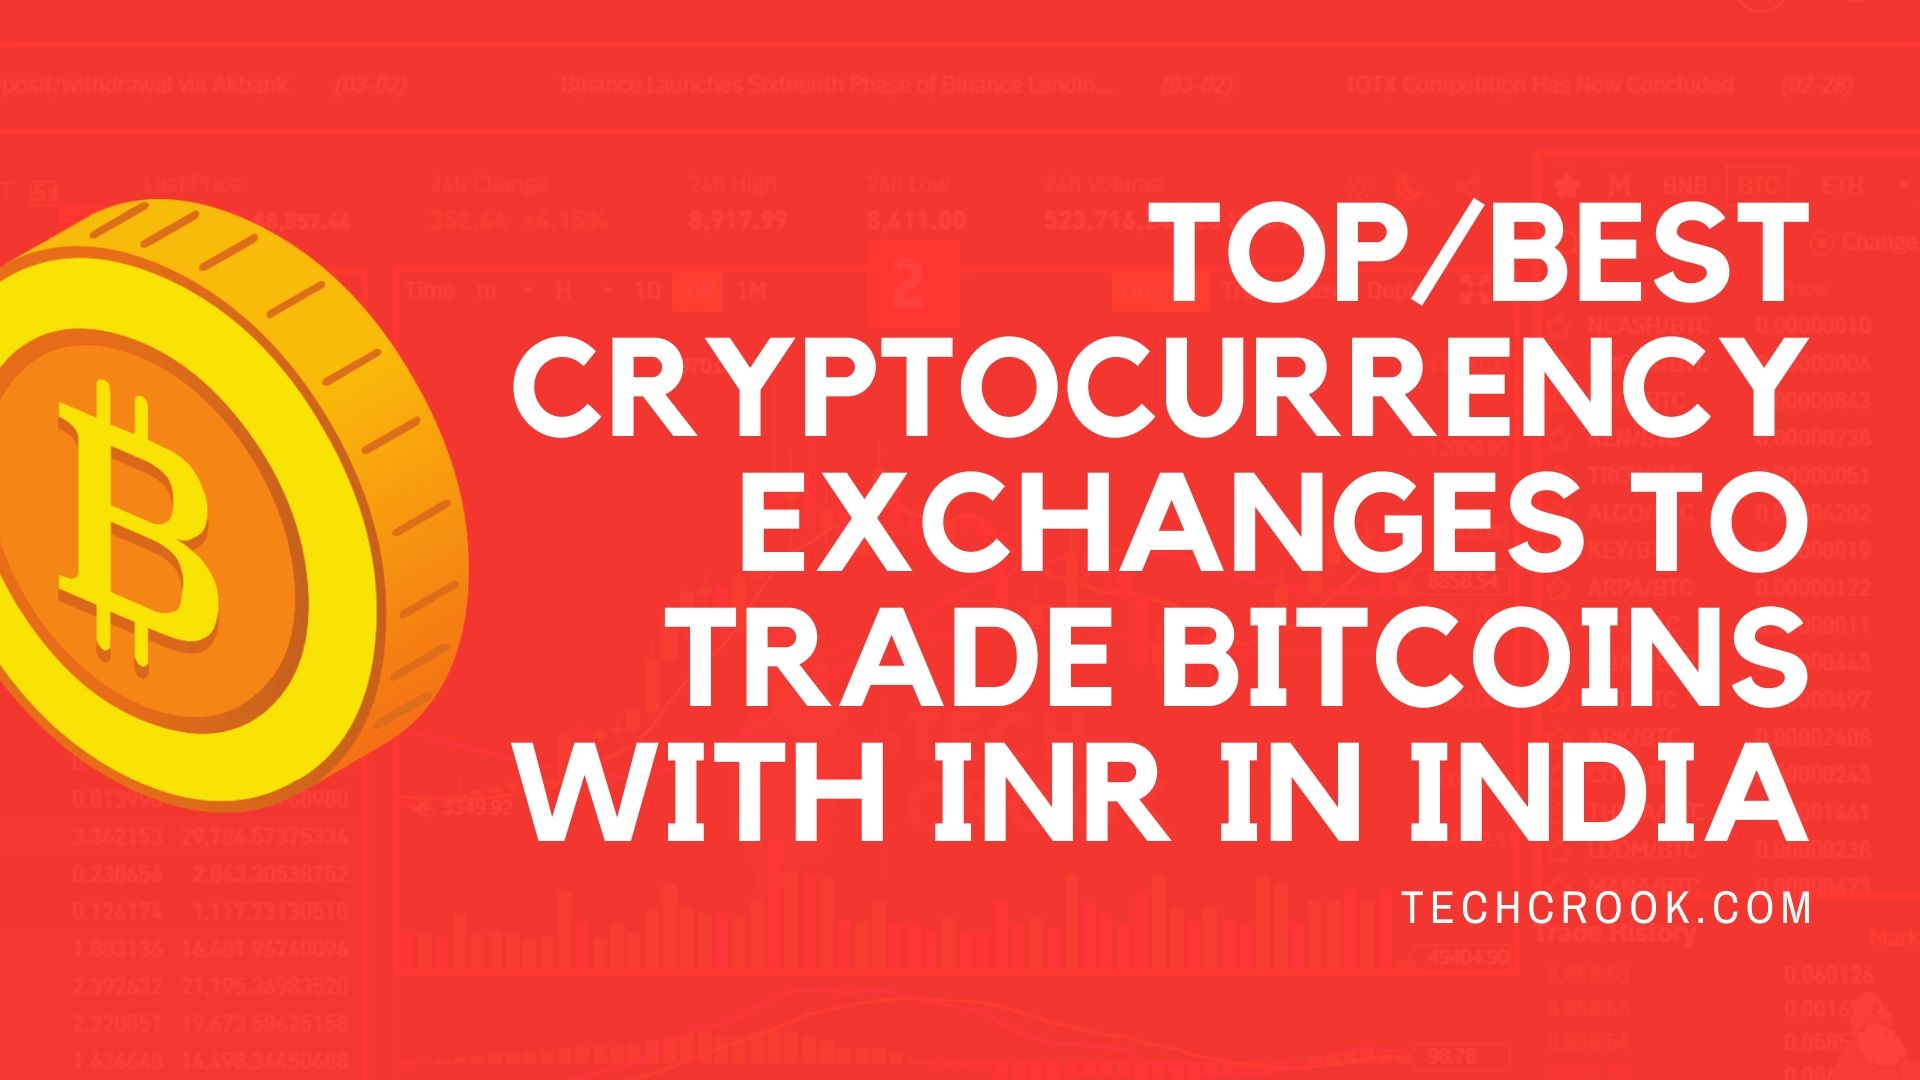 Best and Top cryptocurrency exchanges in India to buy Bitcoin with INR